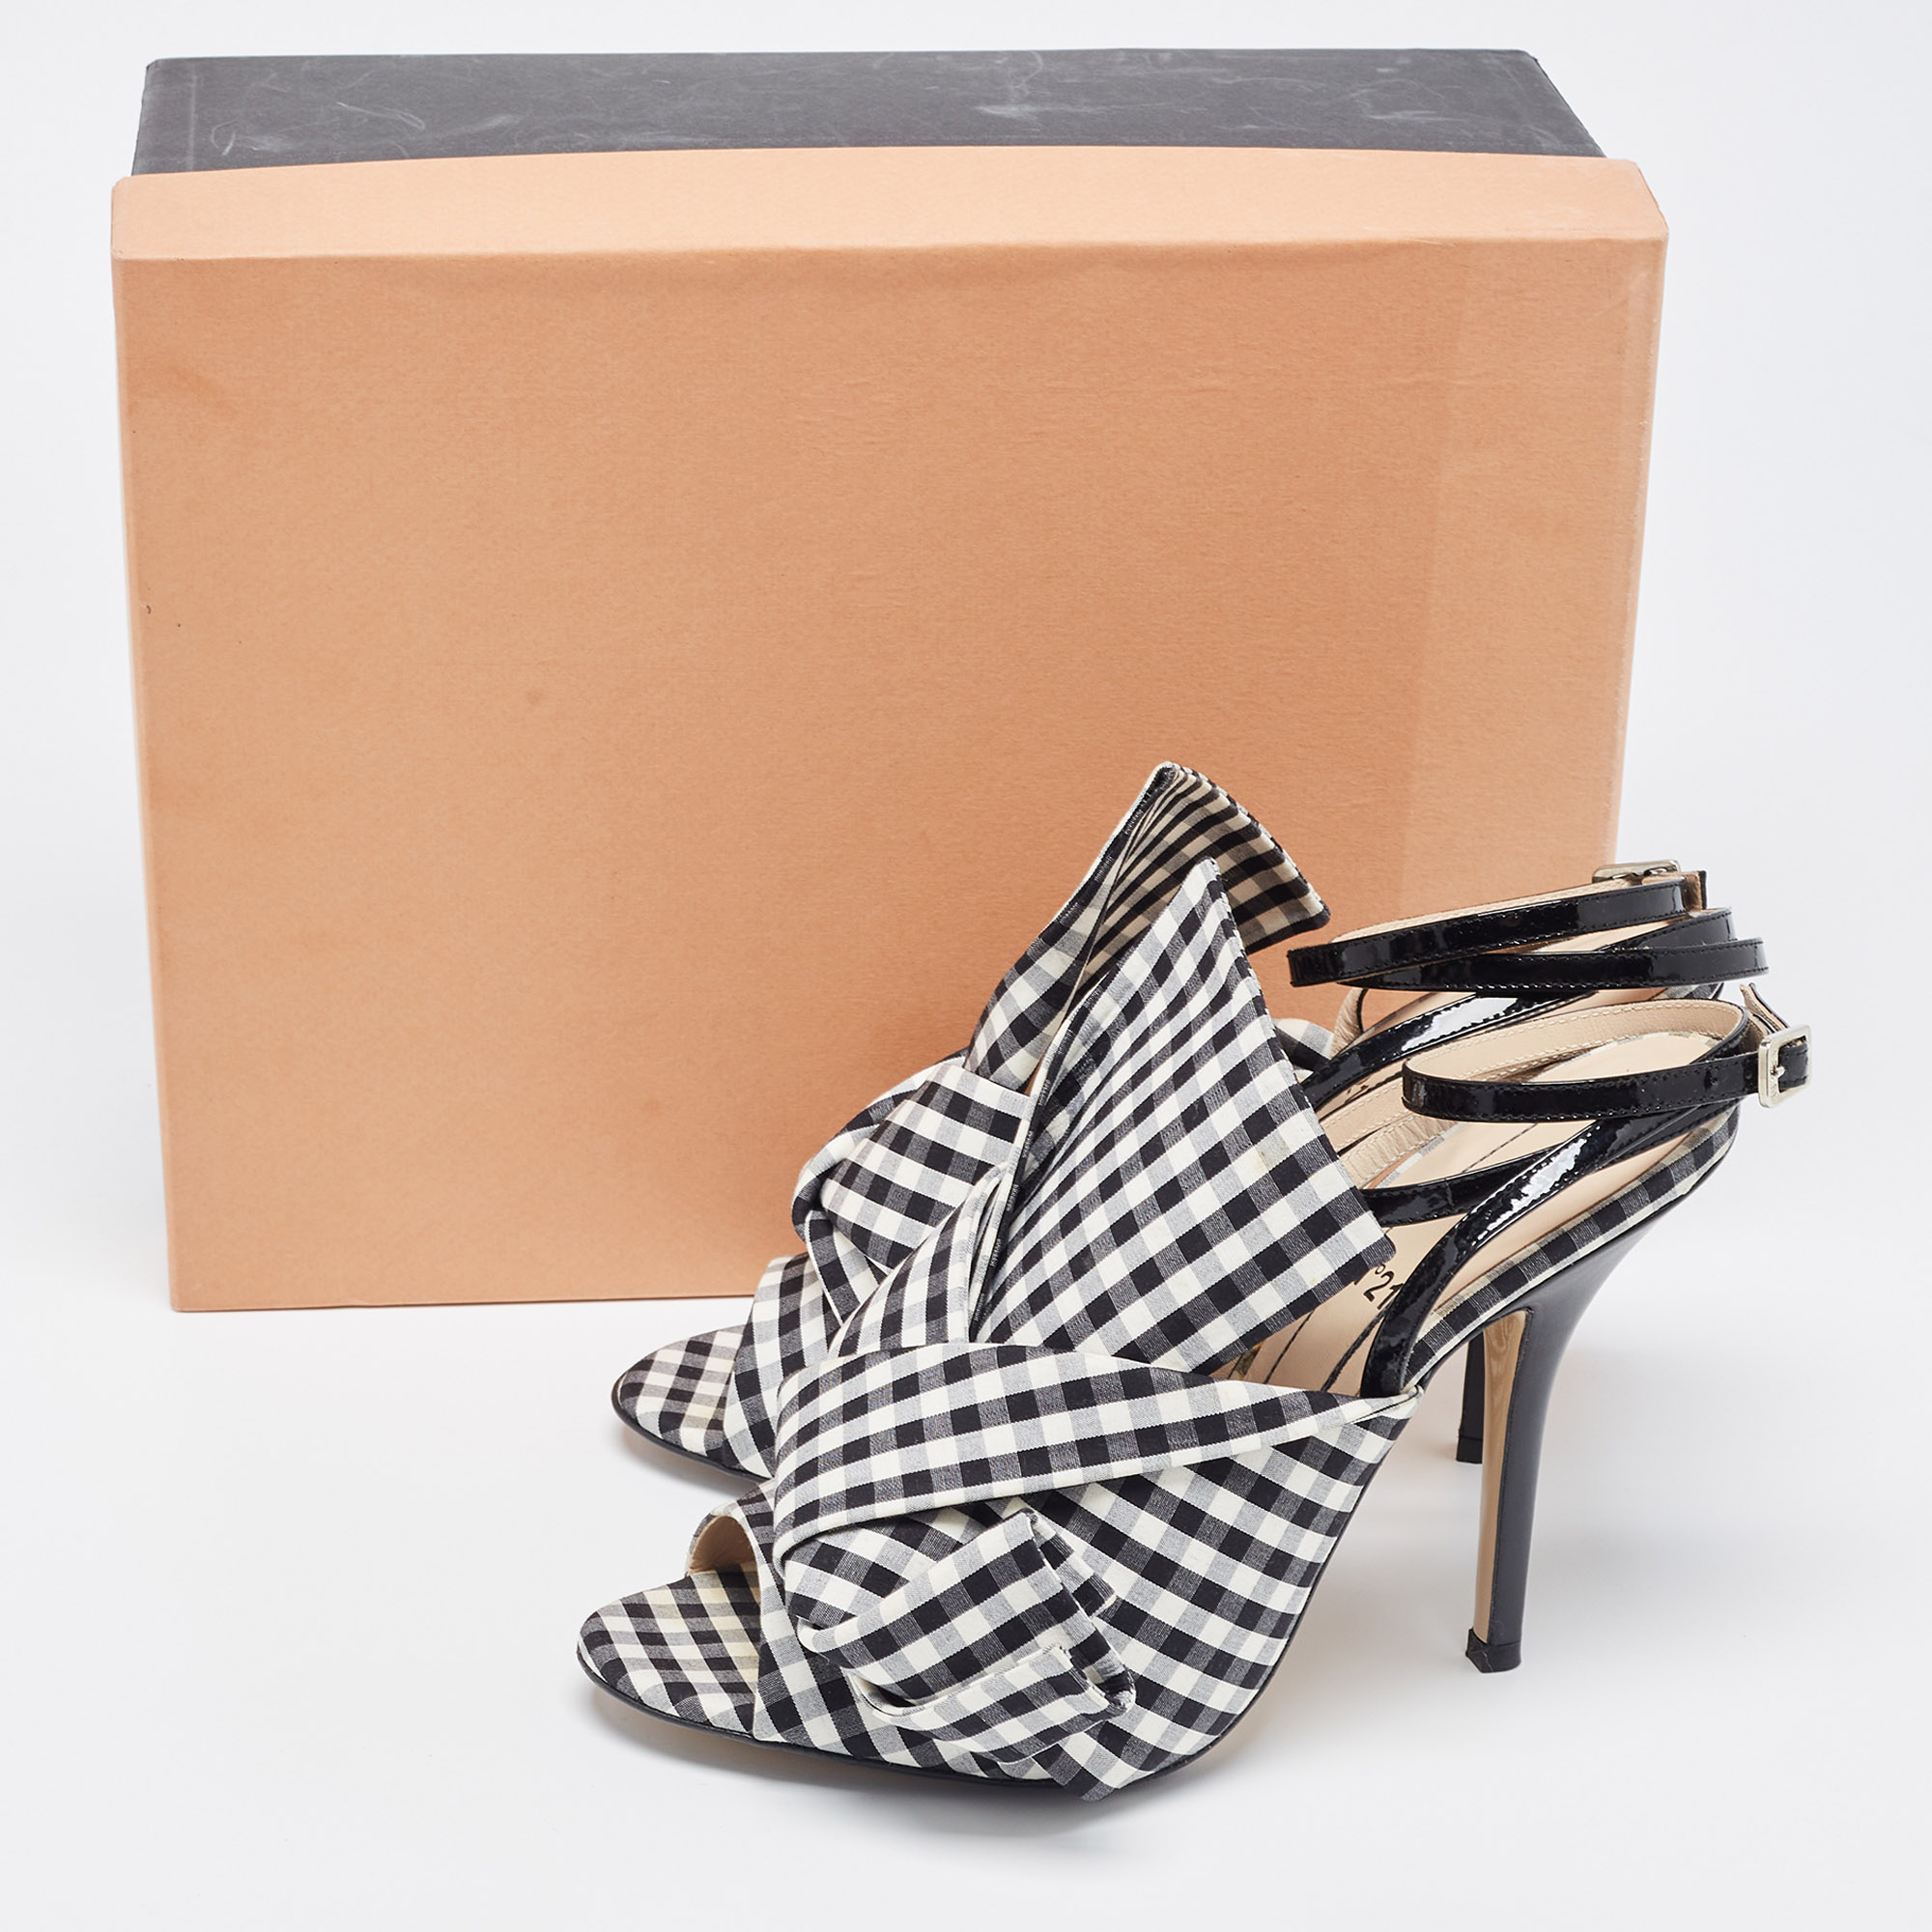 N21 Black/White Fabric Gingham Ankle Wrap Peep Toe Sandals Size 38.5